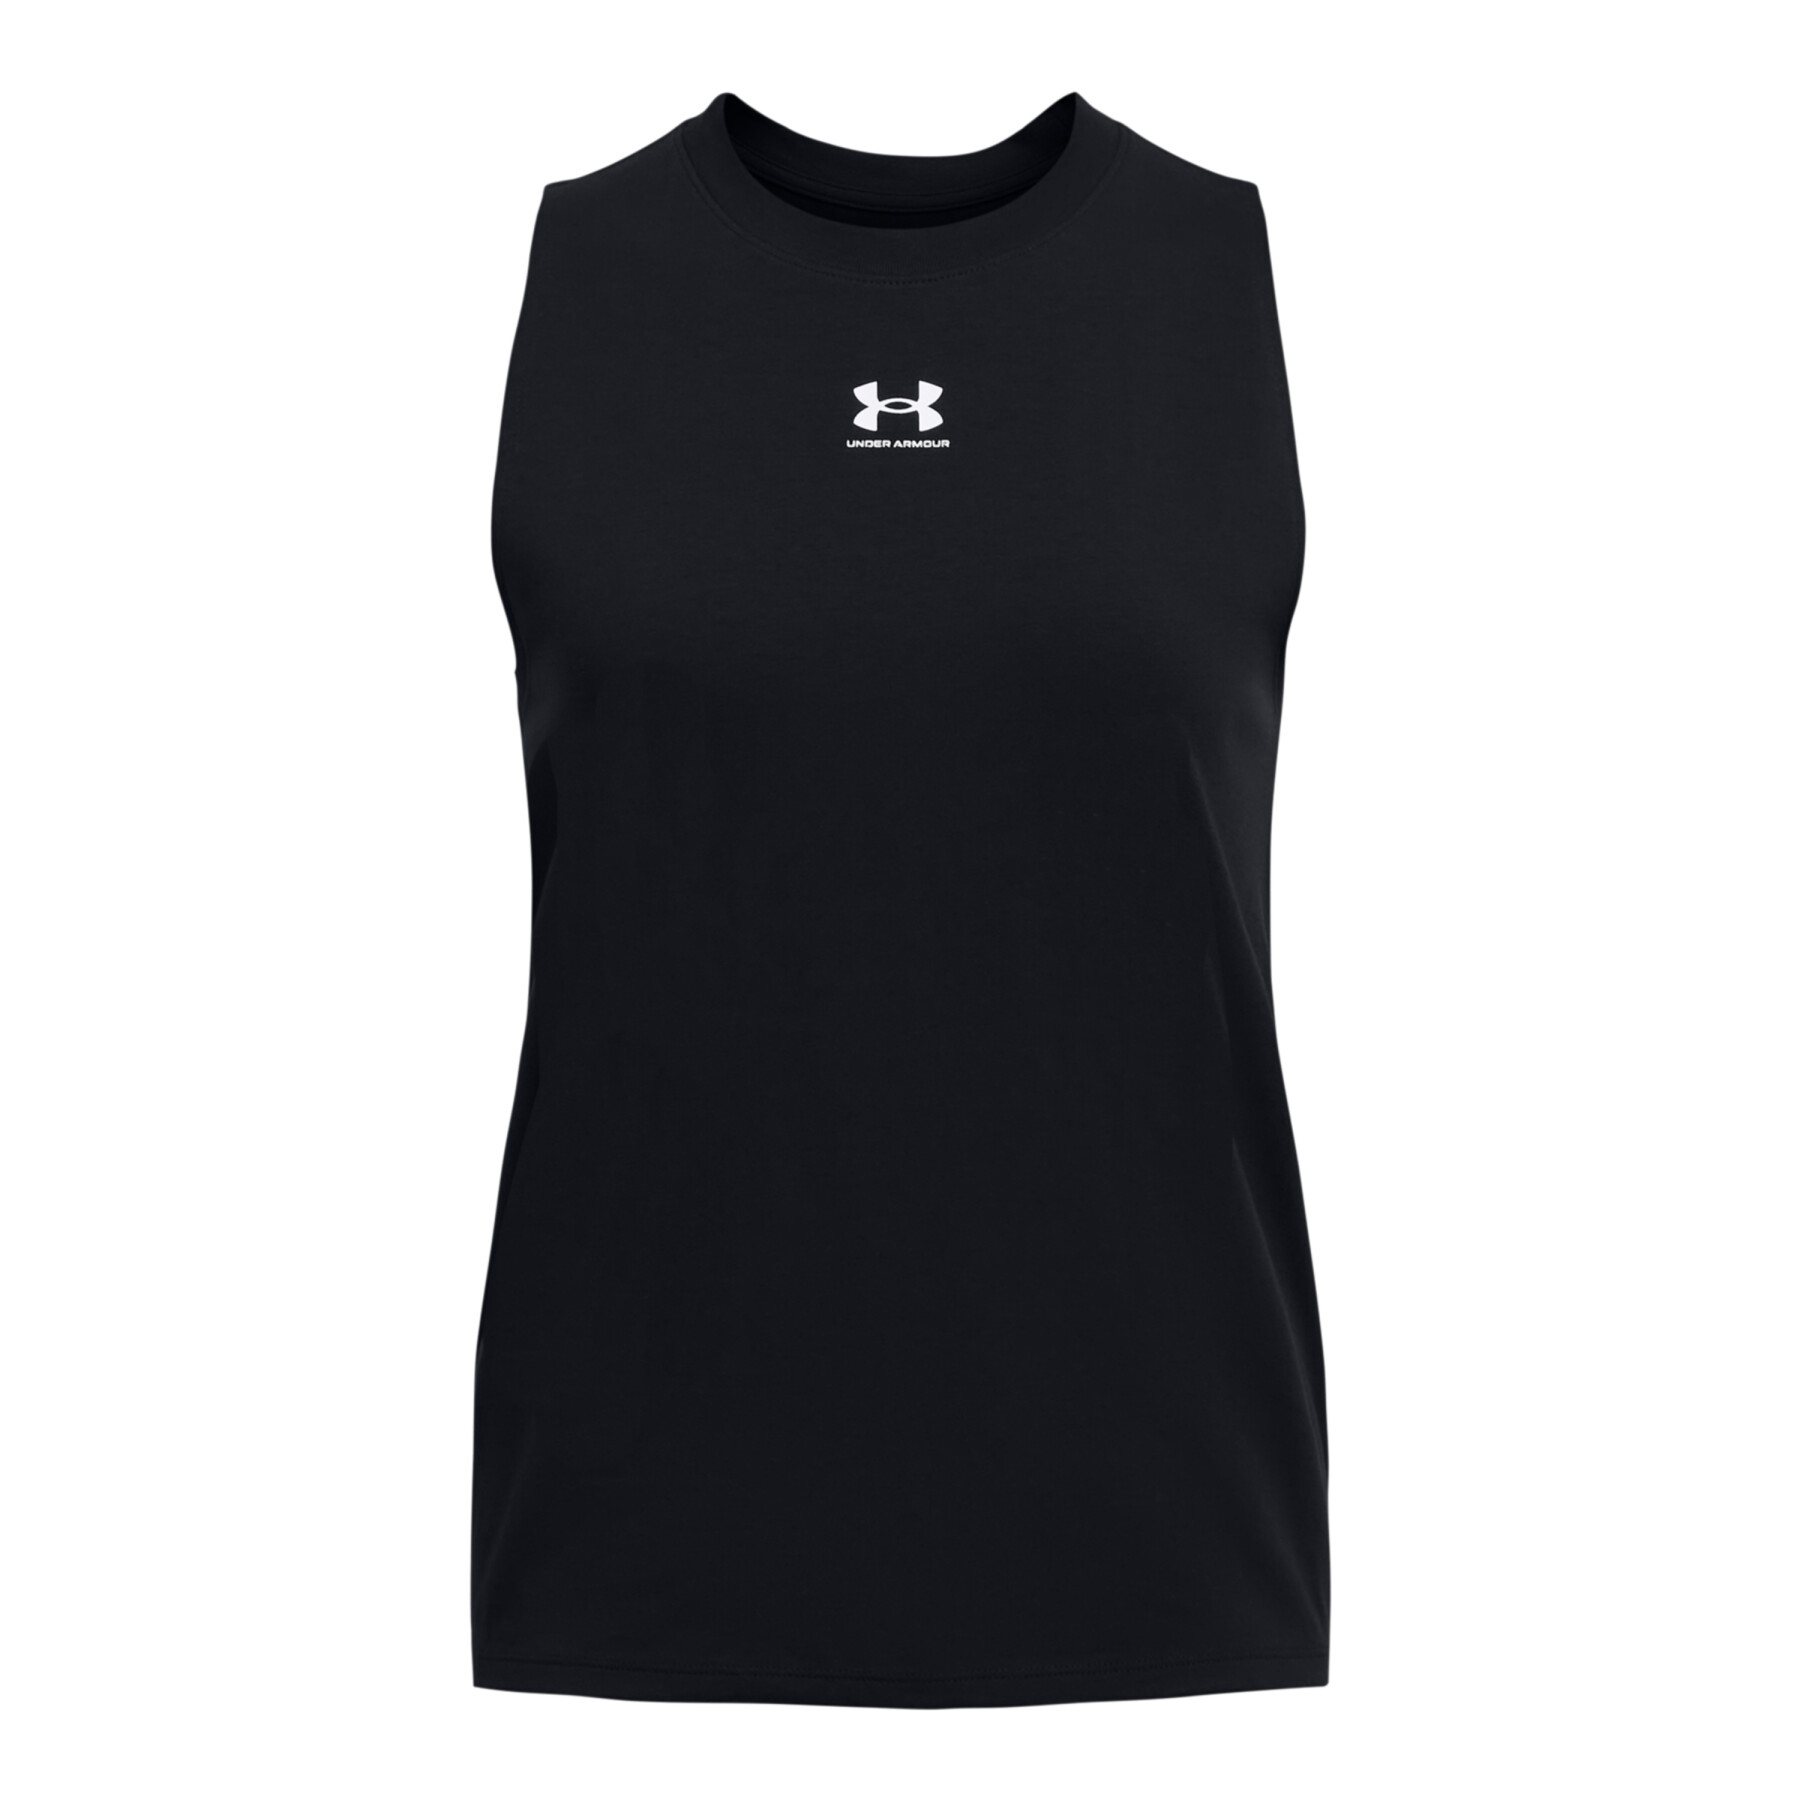 Tampo do tanque feminino Under Armour Off Campus Muscle